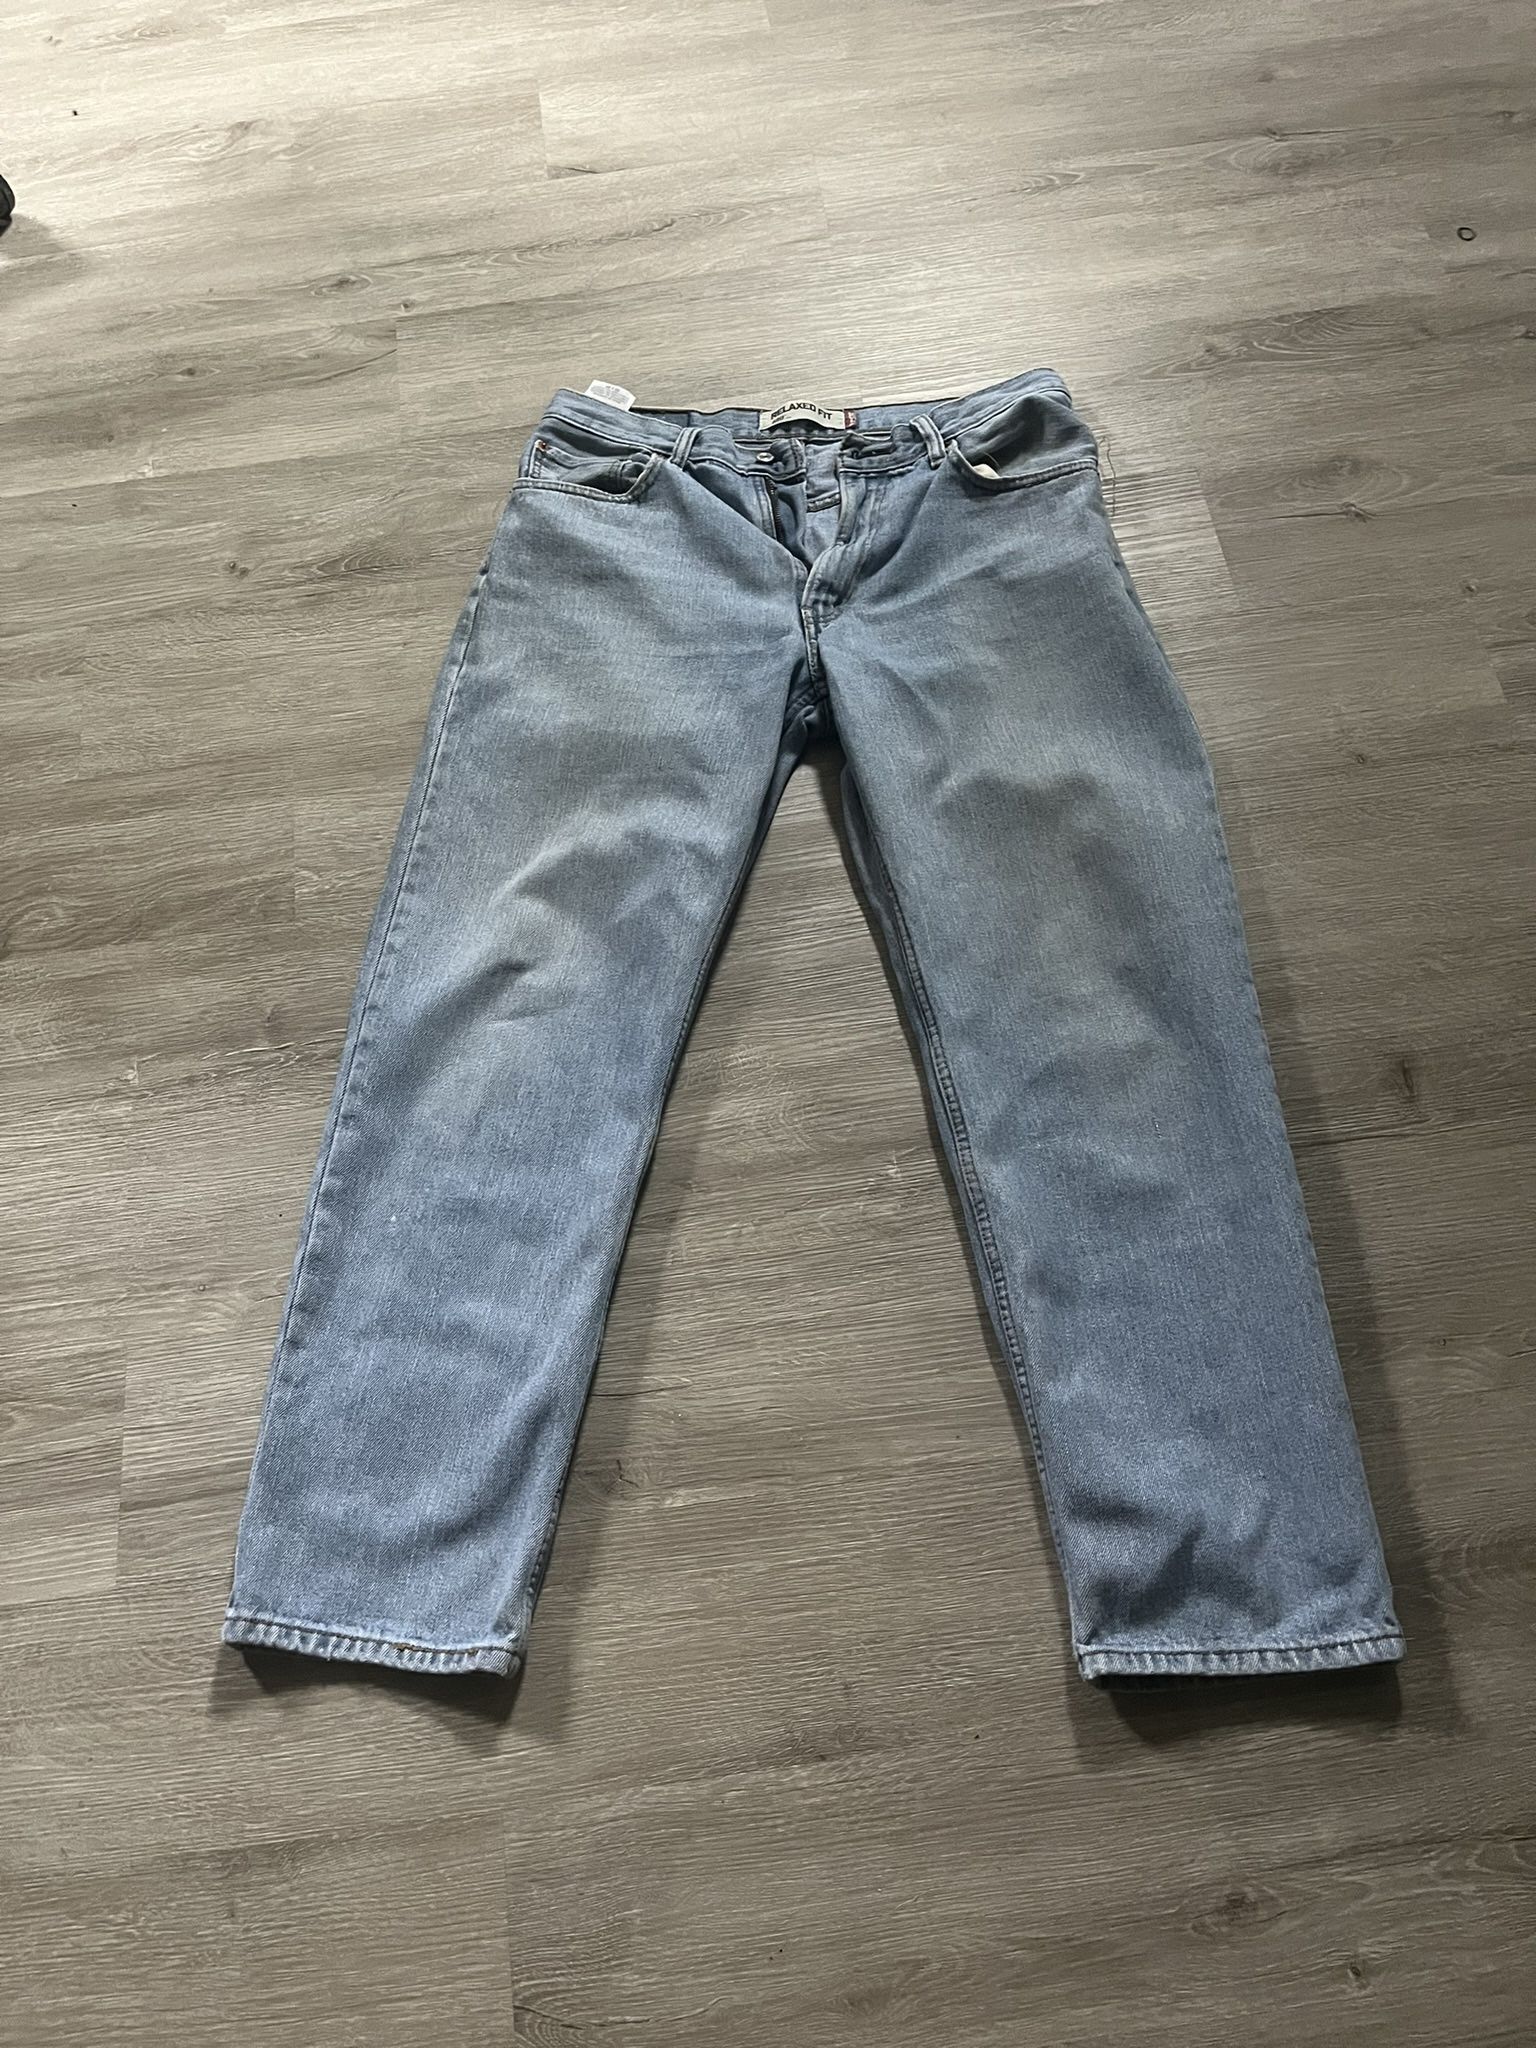 $21 Levi’s 550 relaxed fit Men’s Blue Jeans Size 34x30